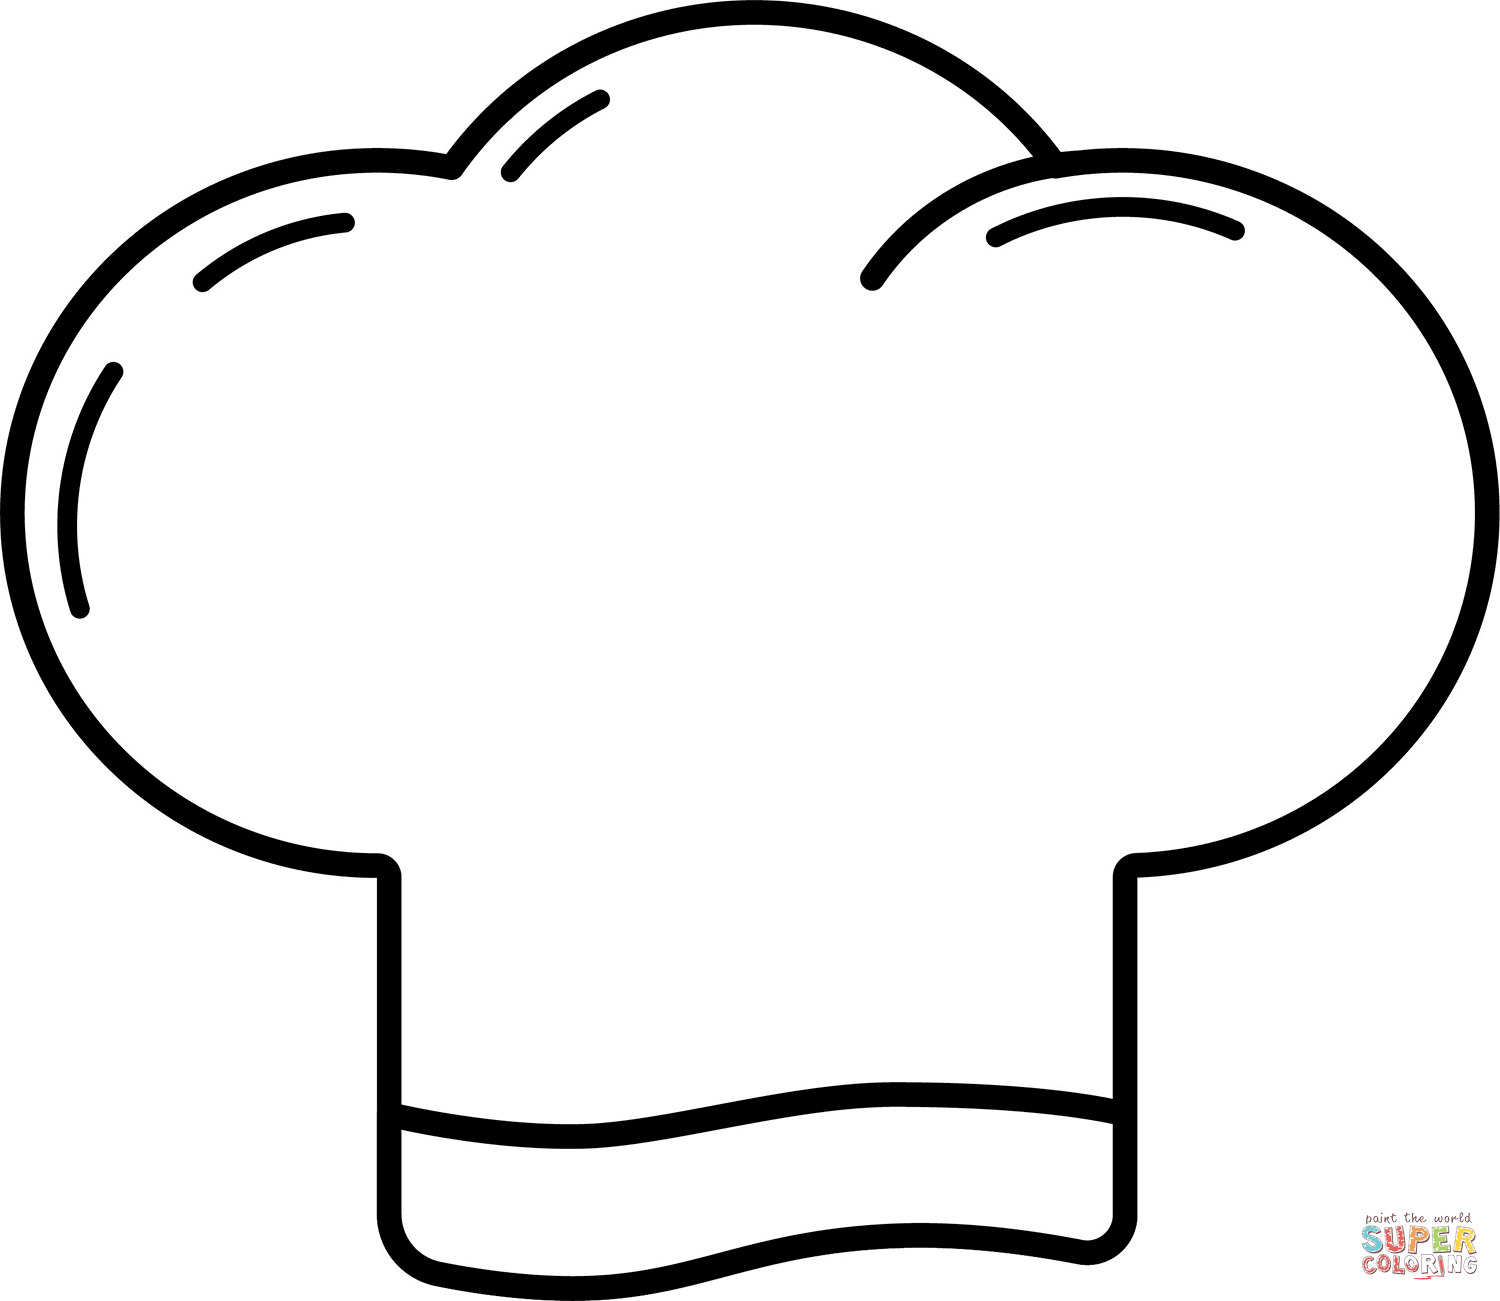 Chef hat coloring page free printable coloring pages